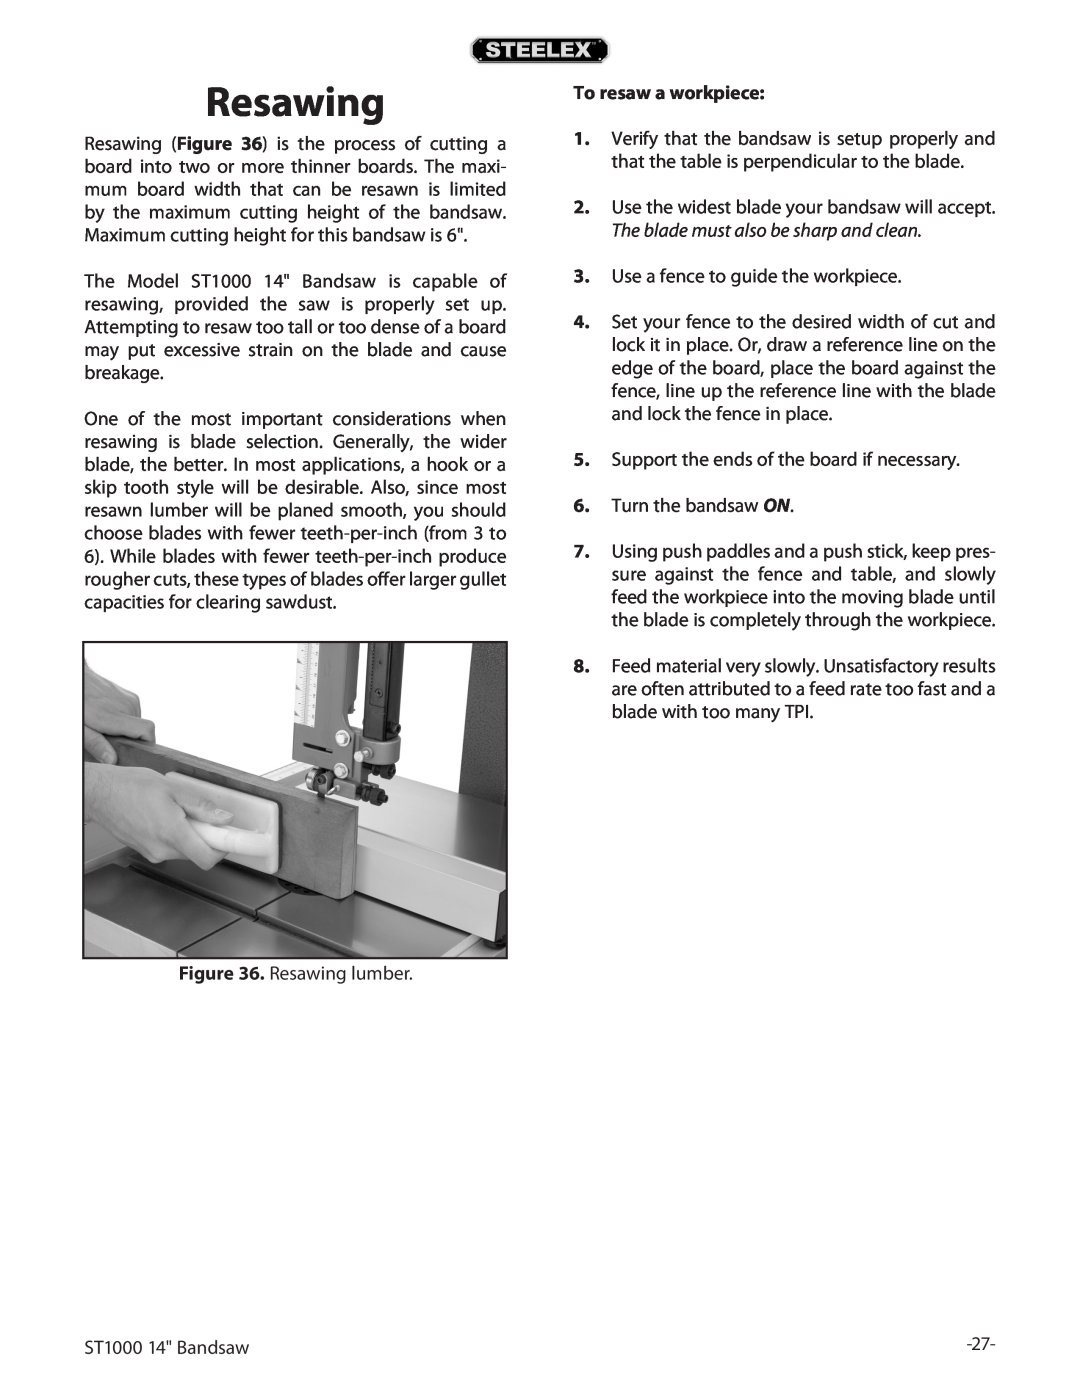 Woodstock ST1000 owner manual Resawing, To resaw a workpiece 